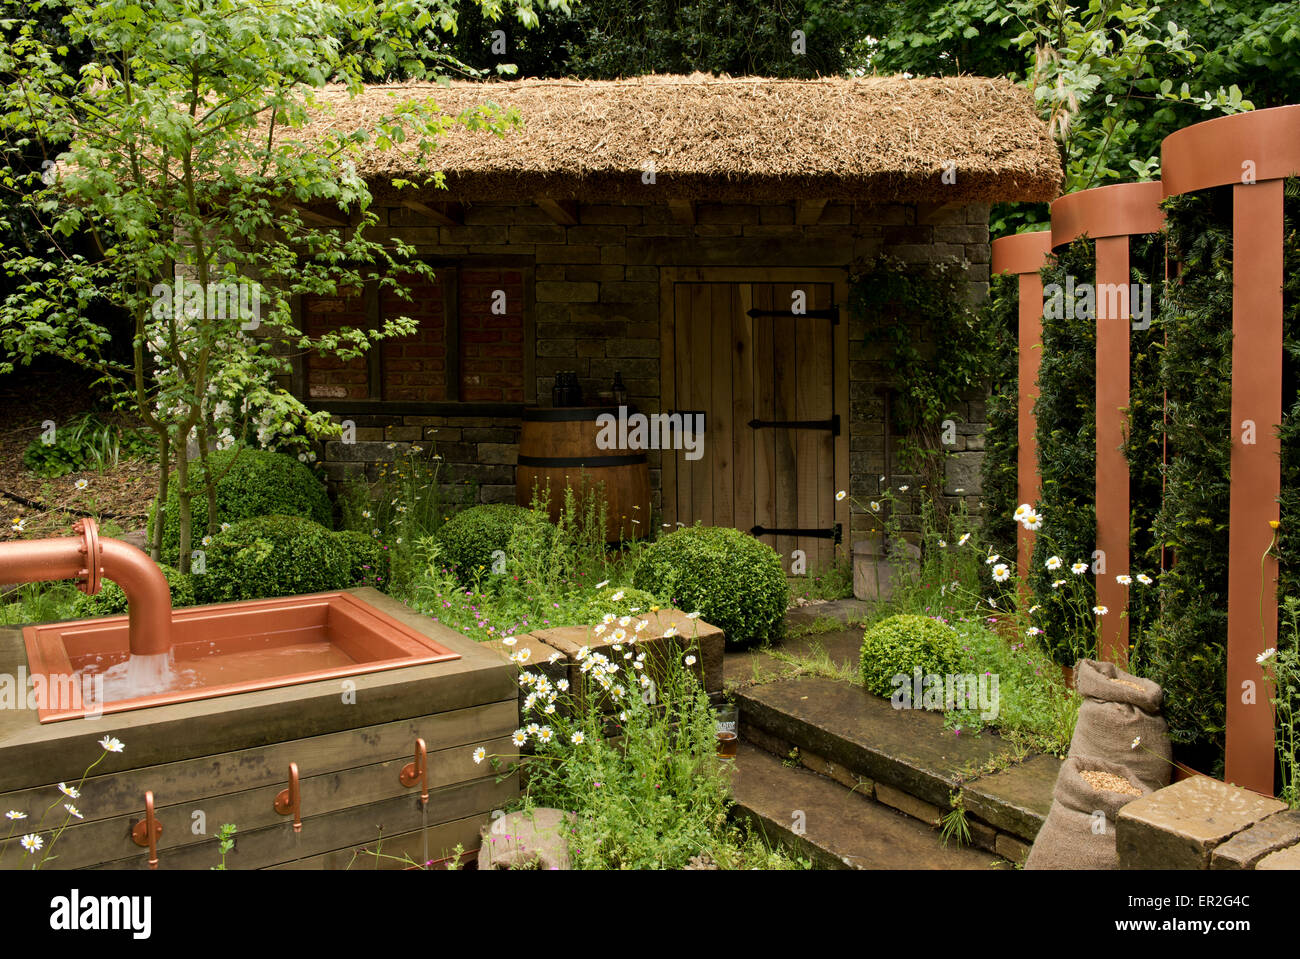 The Brewers Yard Garden by Welcome to Yorkshire at The RHS Chelsea Flower Show, 2015, London, UK. Stock Photo